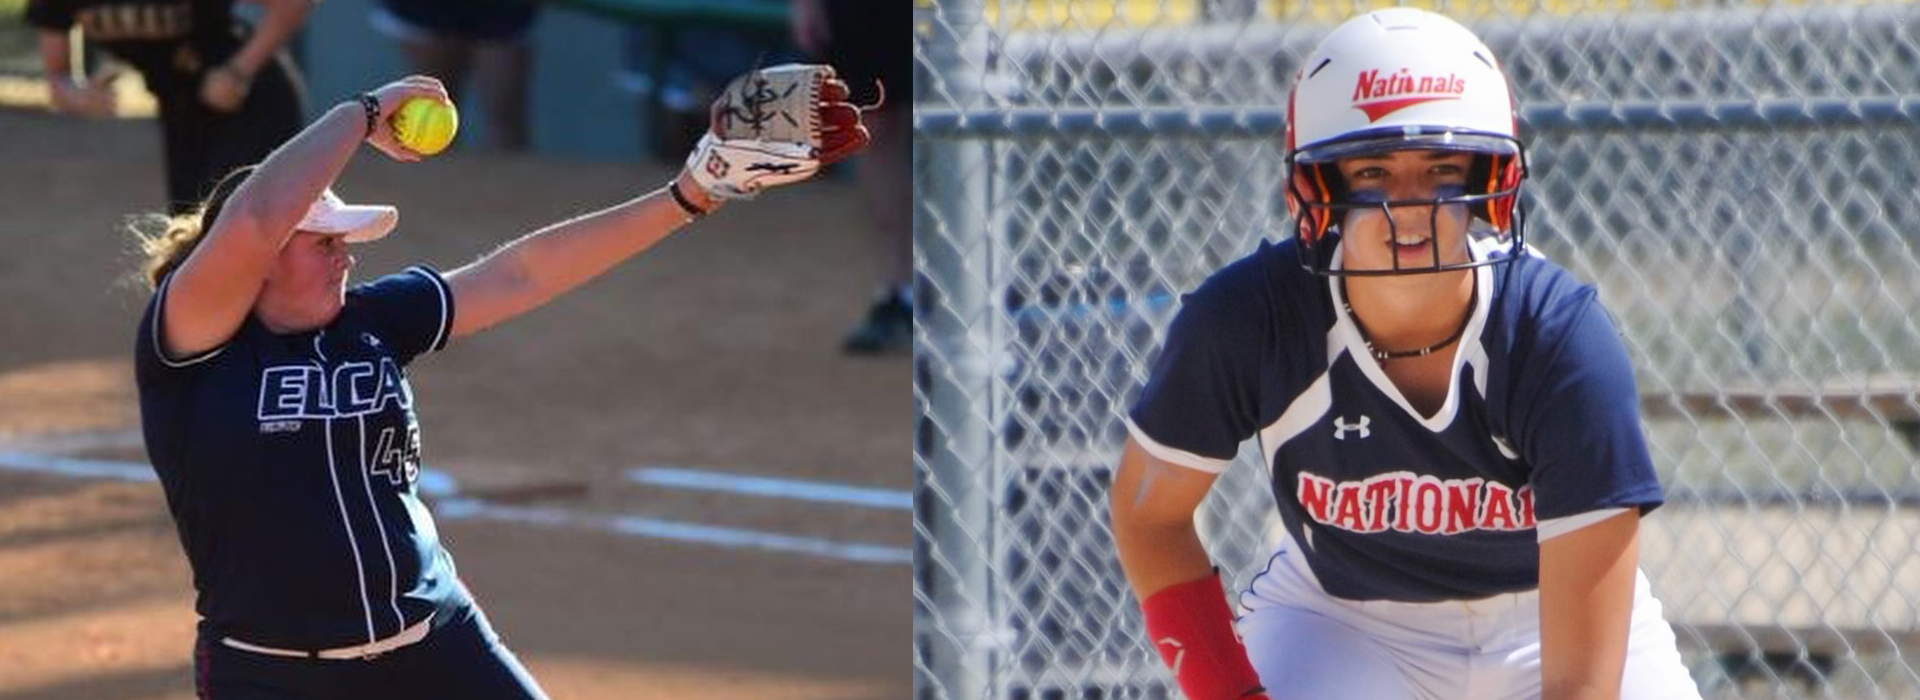 Tech softball looks to the future with additions of P/IF Rush and OF Schlageter